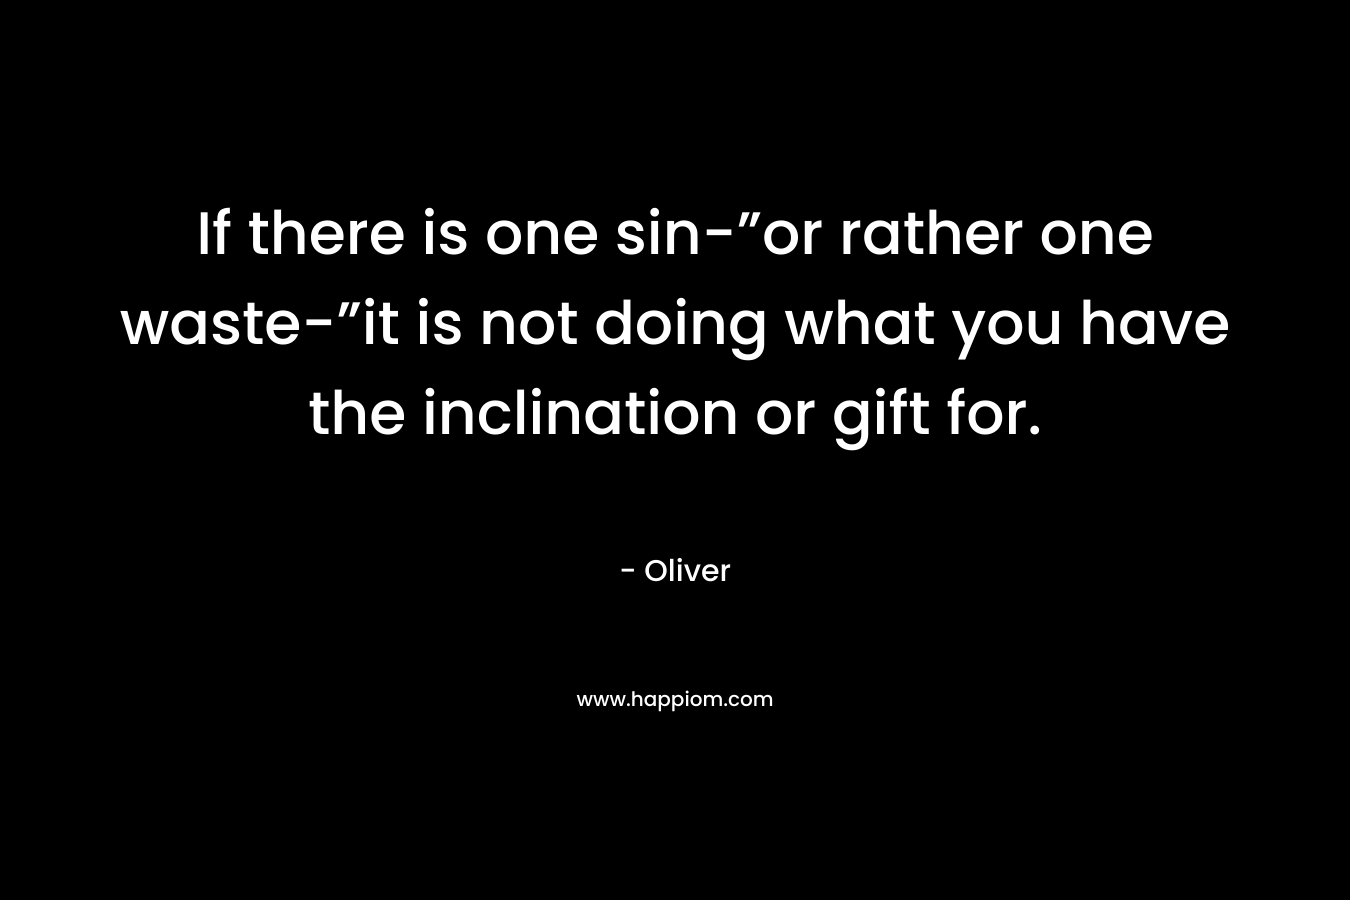 If there is one sin-”or rather one waste-”it is not doing what you have the inclination or gift for.